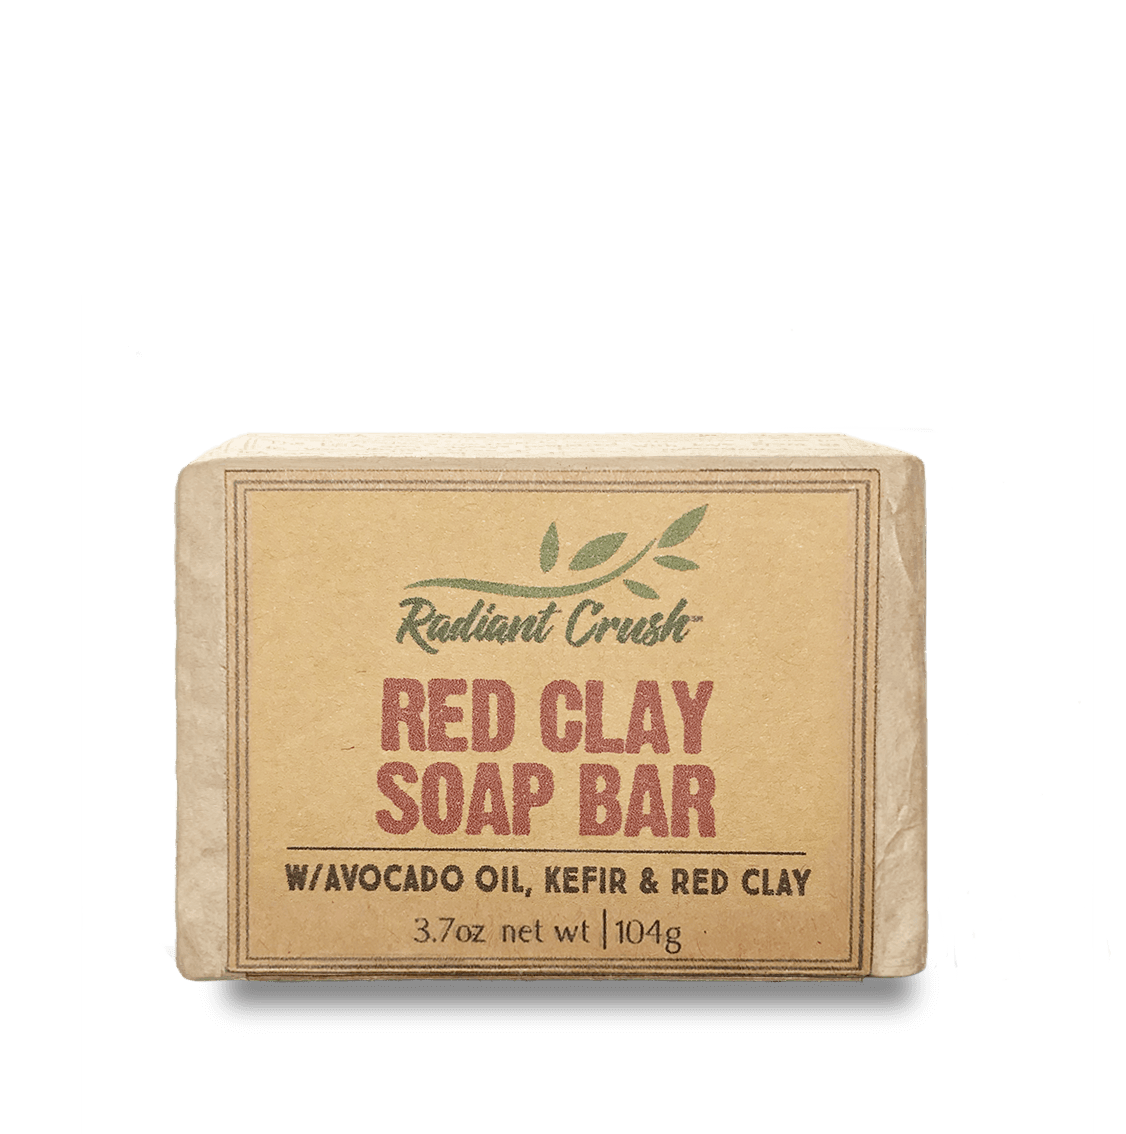 Red Clay Bar Soap - Radiant Crush